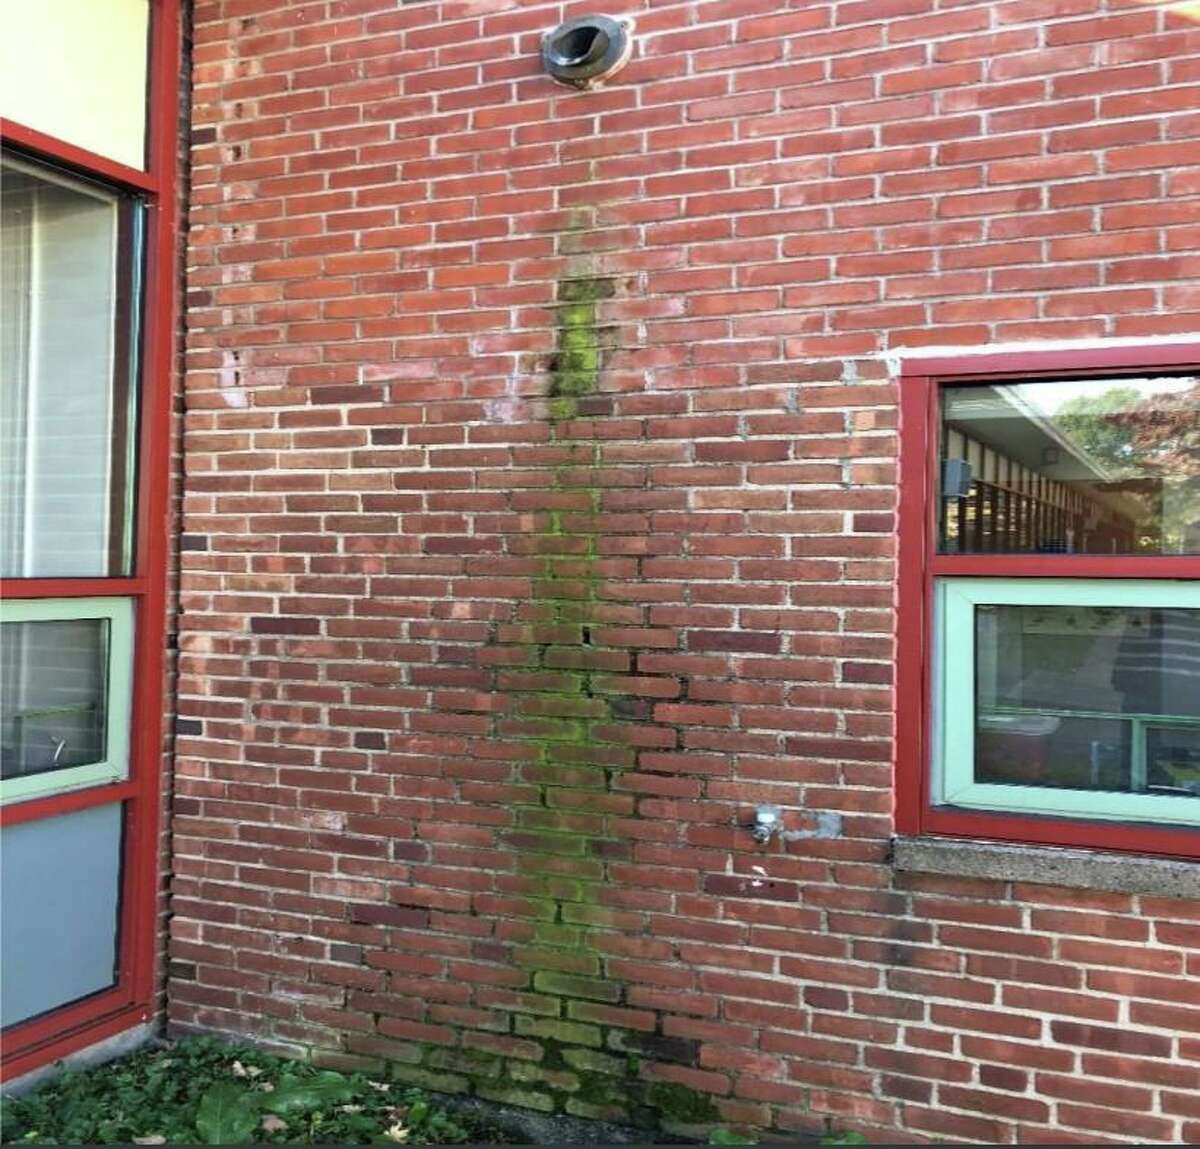 A clogged roof drain led to running water over the side of the building at Newfield Elementary School, resulting in heavy mold on the inside of the wall.